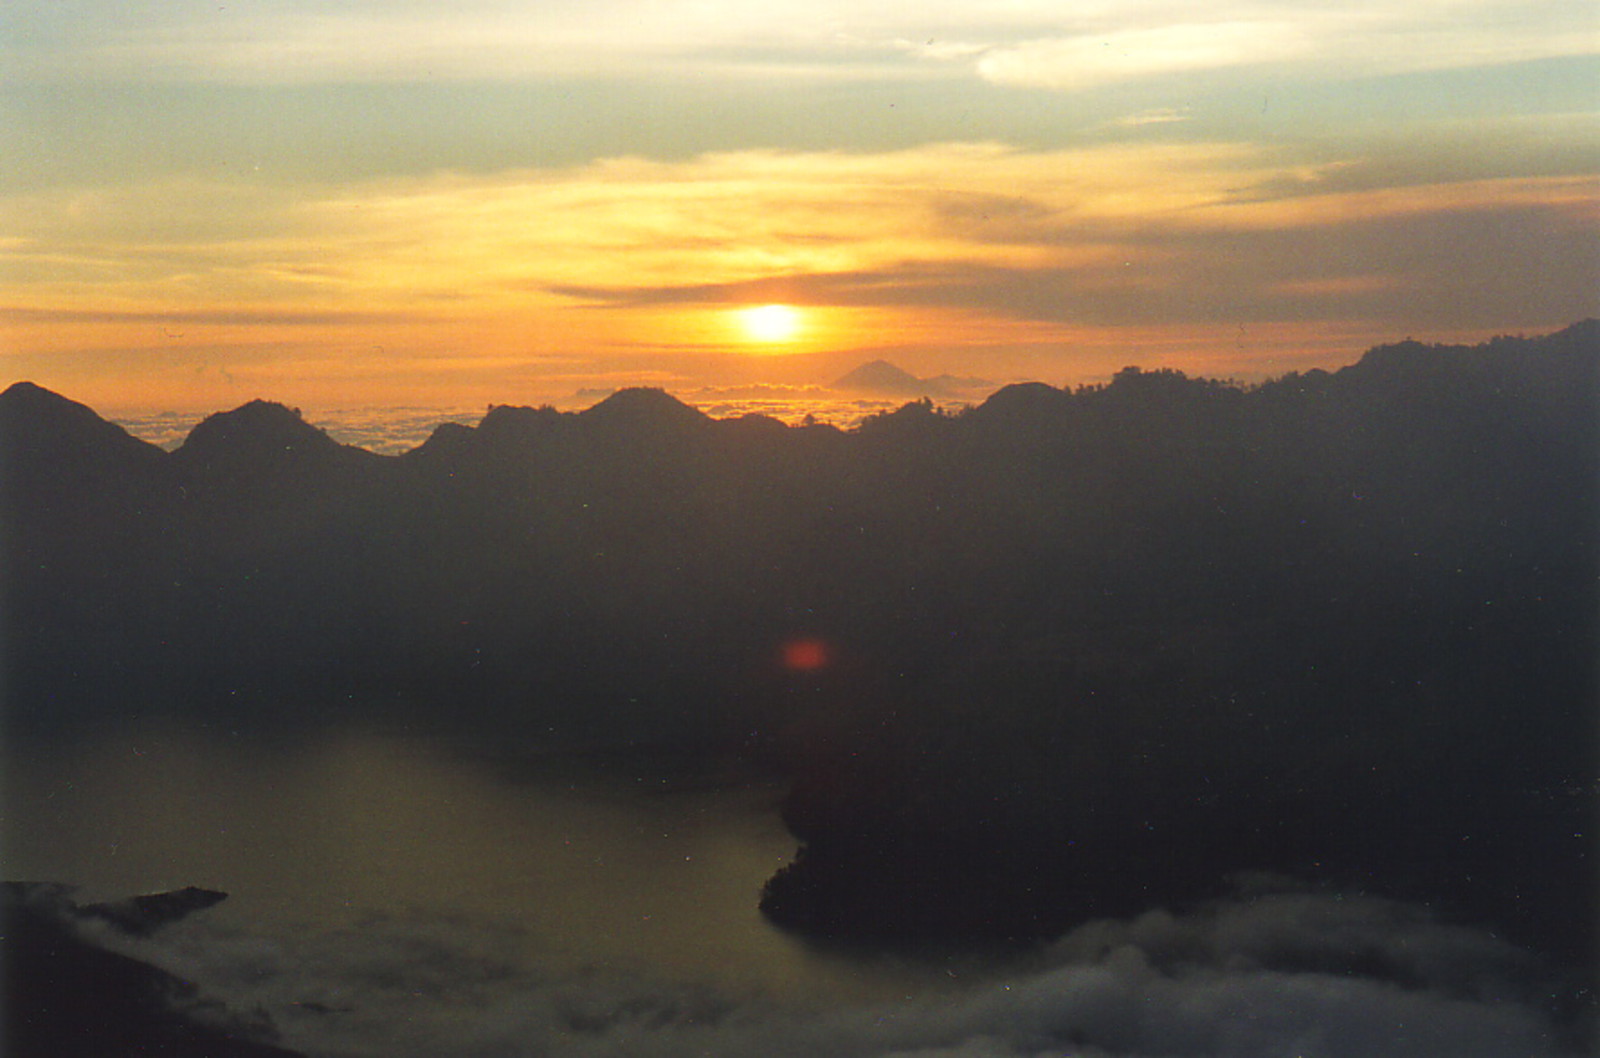 A sunset view from Rinjani's second rim at 3000m